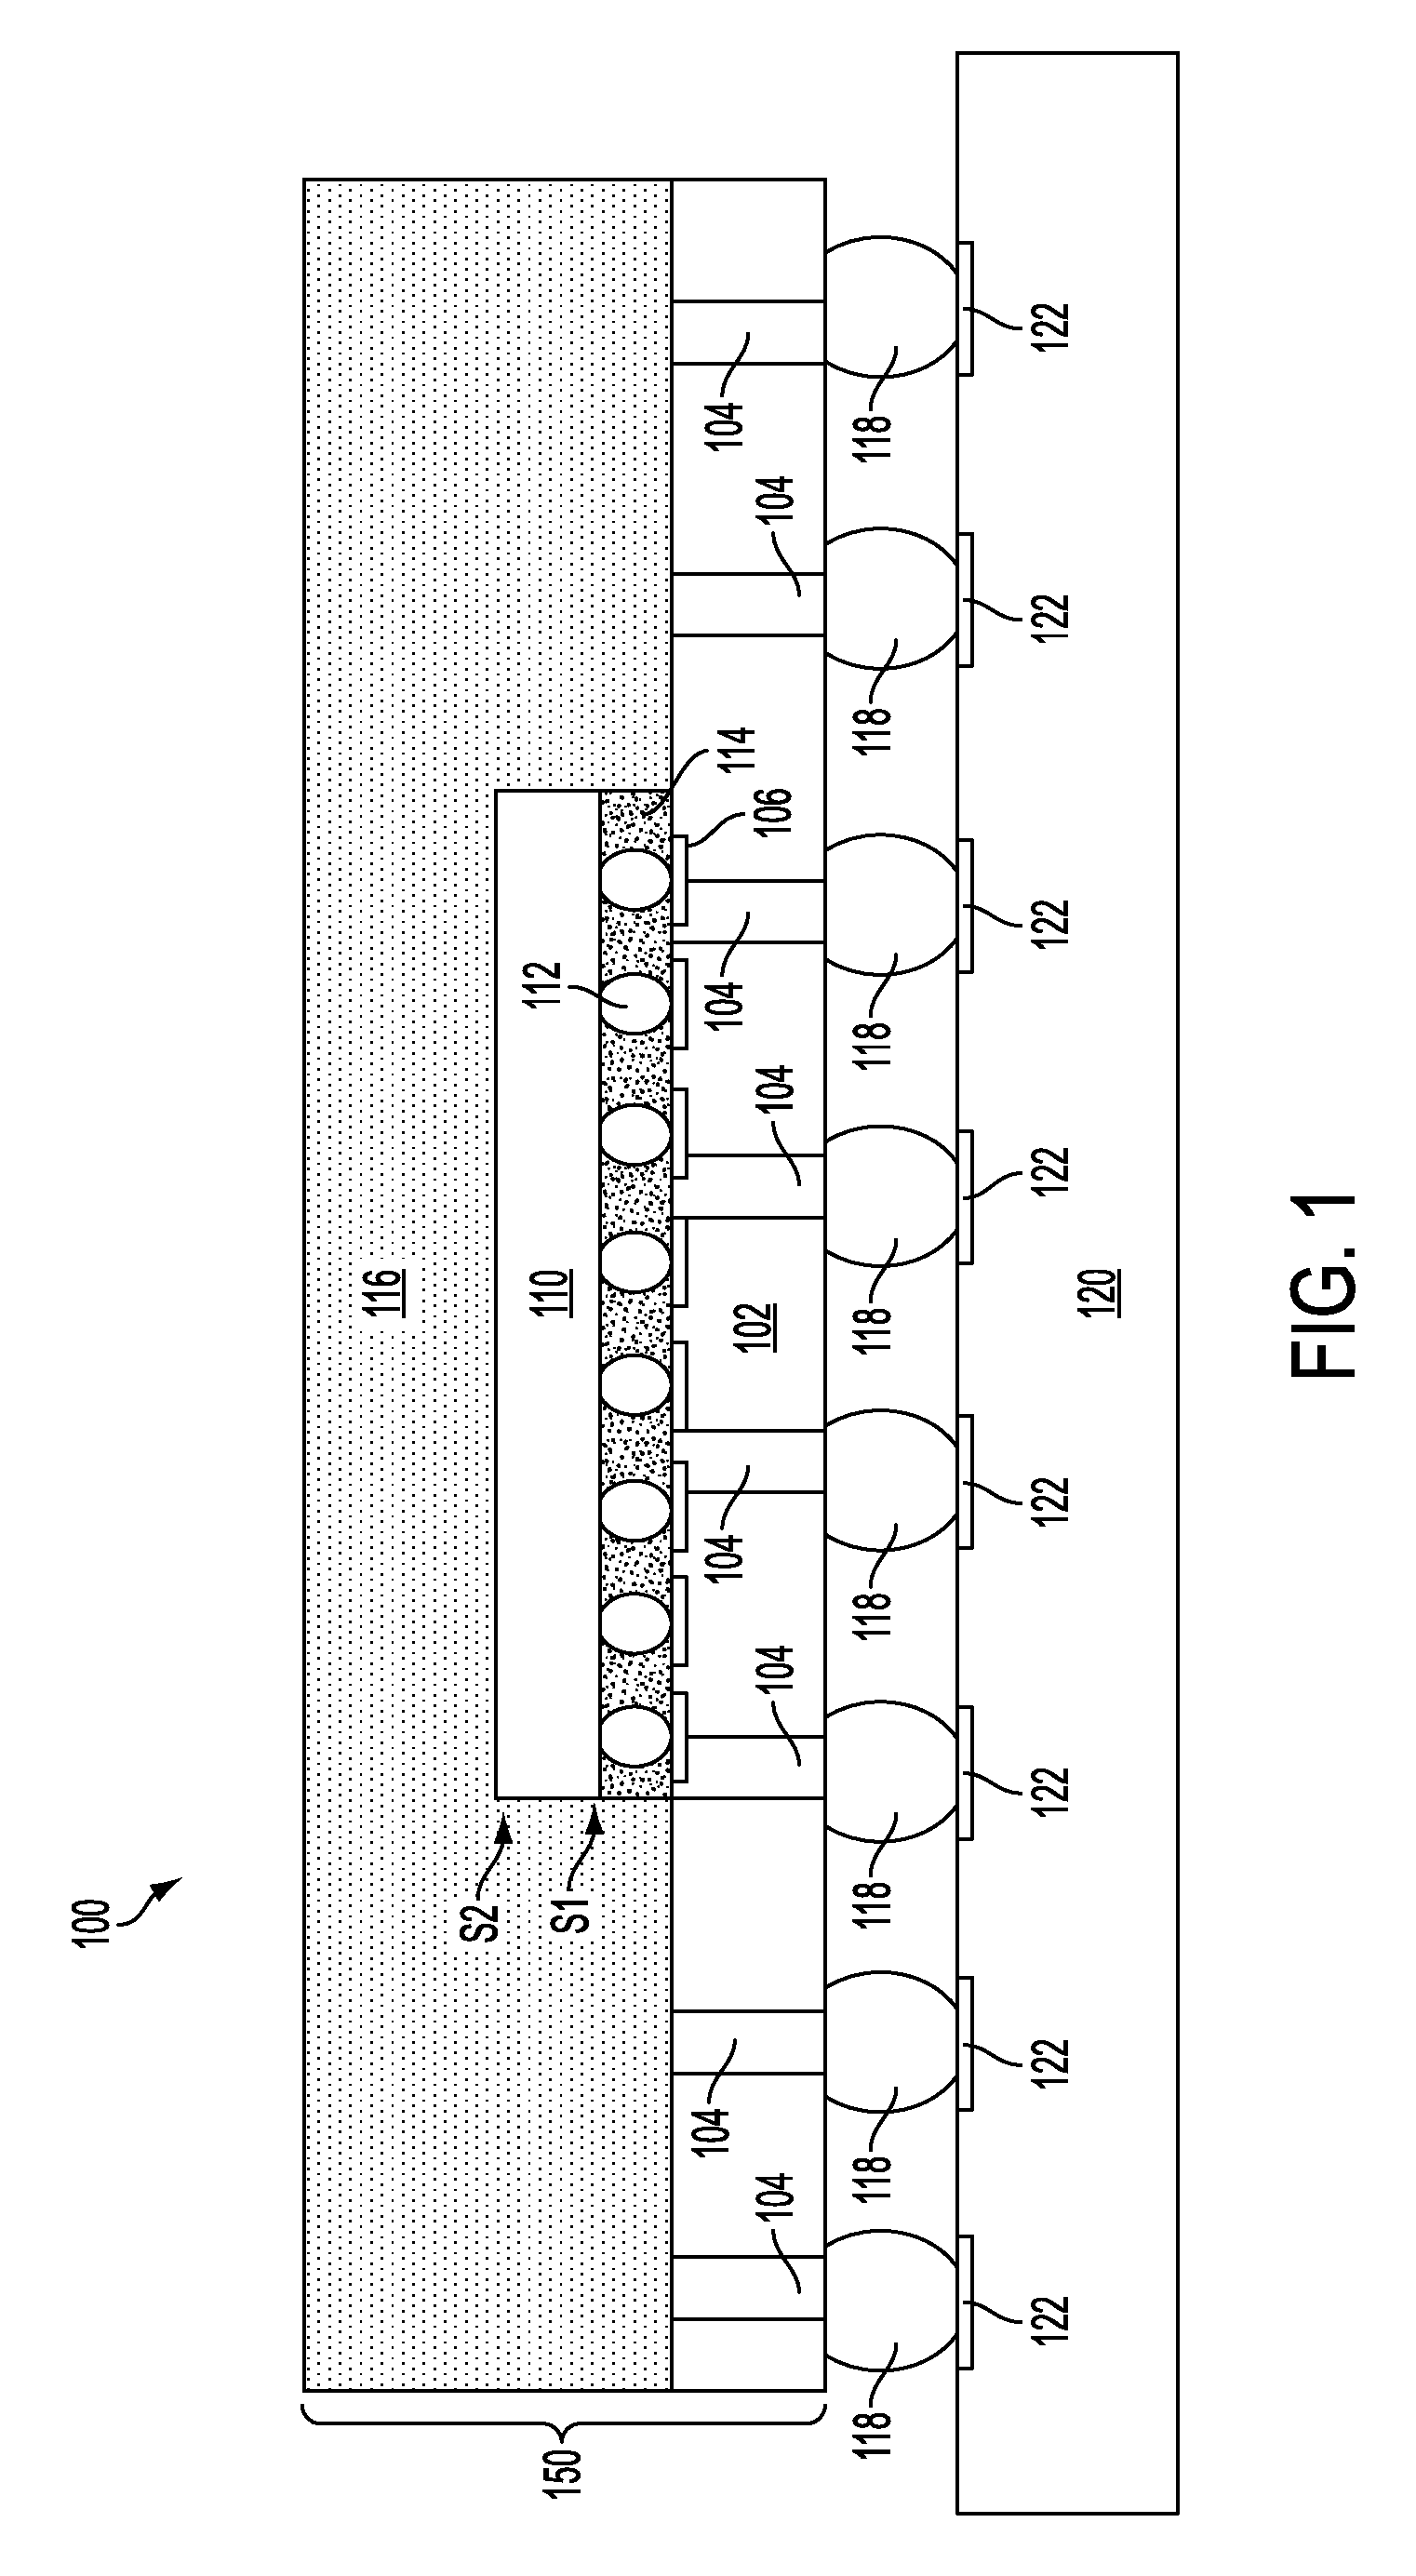 Interconnect layouts for electronic assemblies